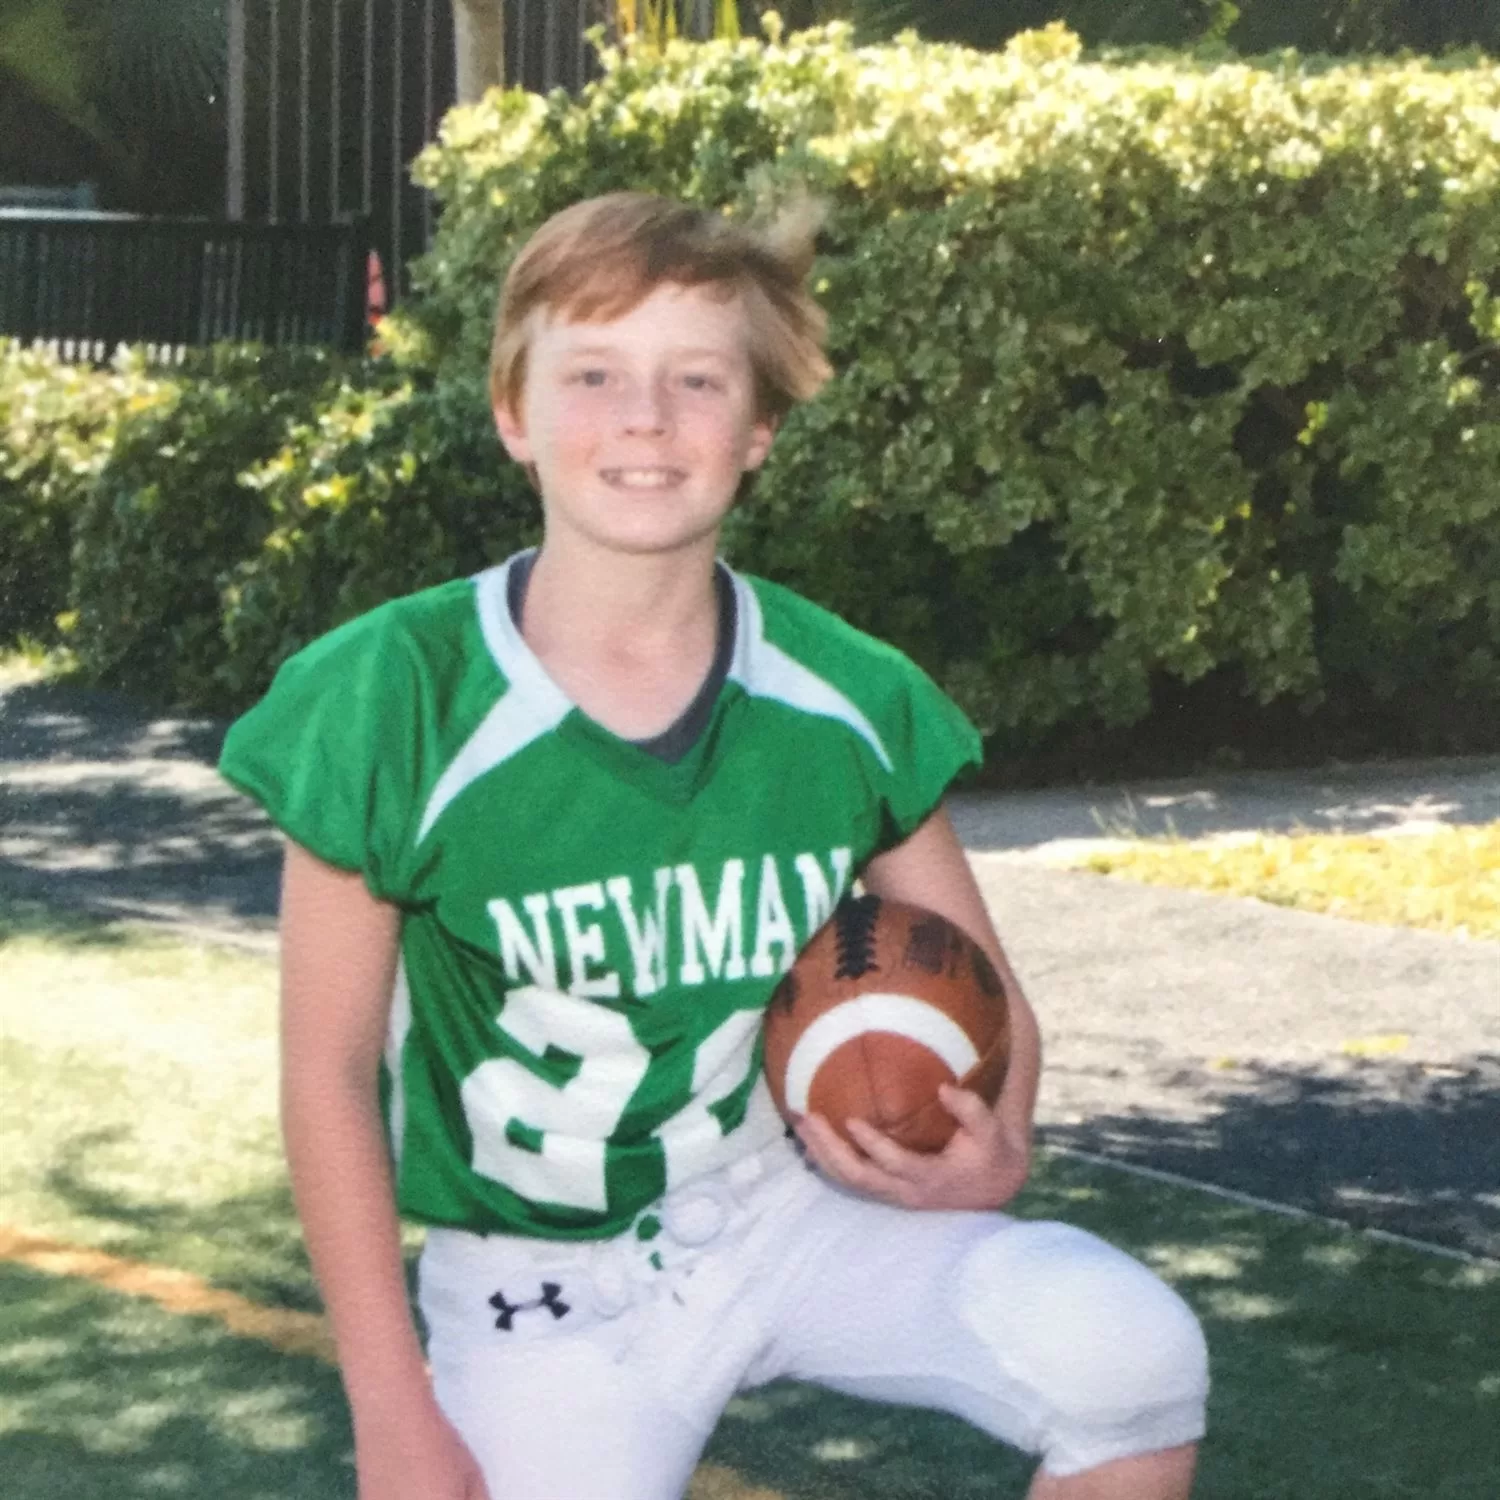 Heid Manning: Rising to The Top at Isidore Newman School... Continuing a Family Legacy in Football"